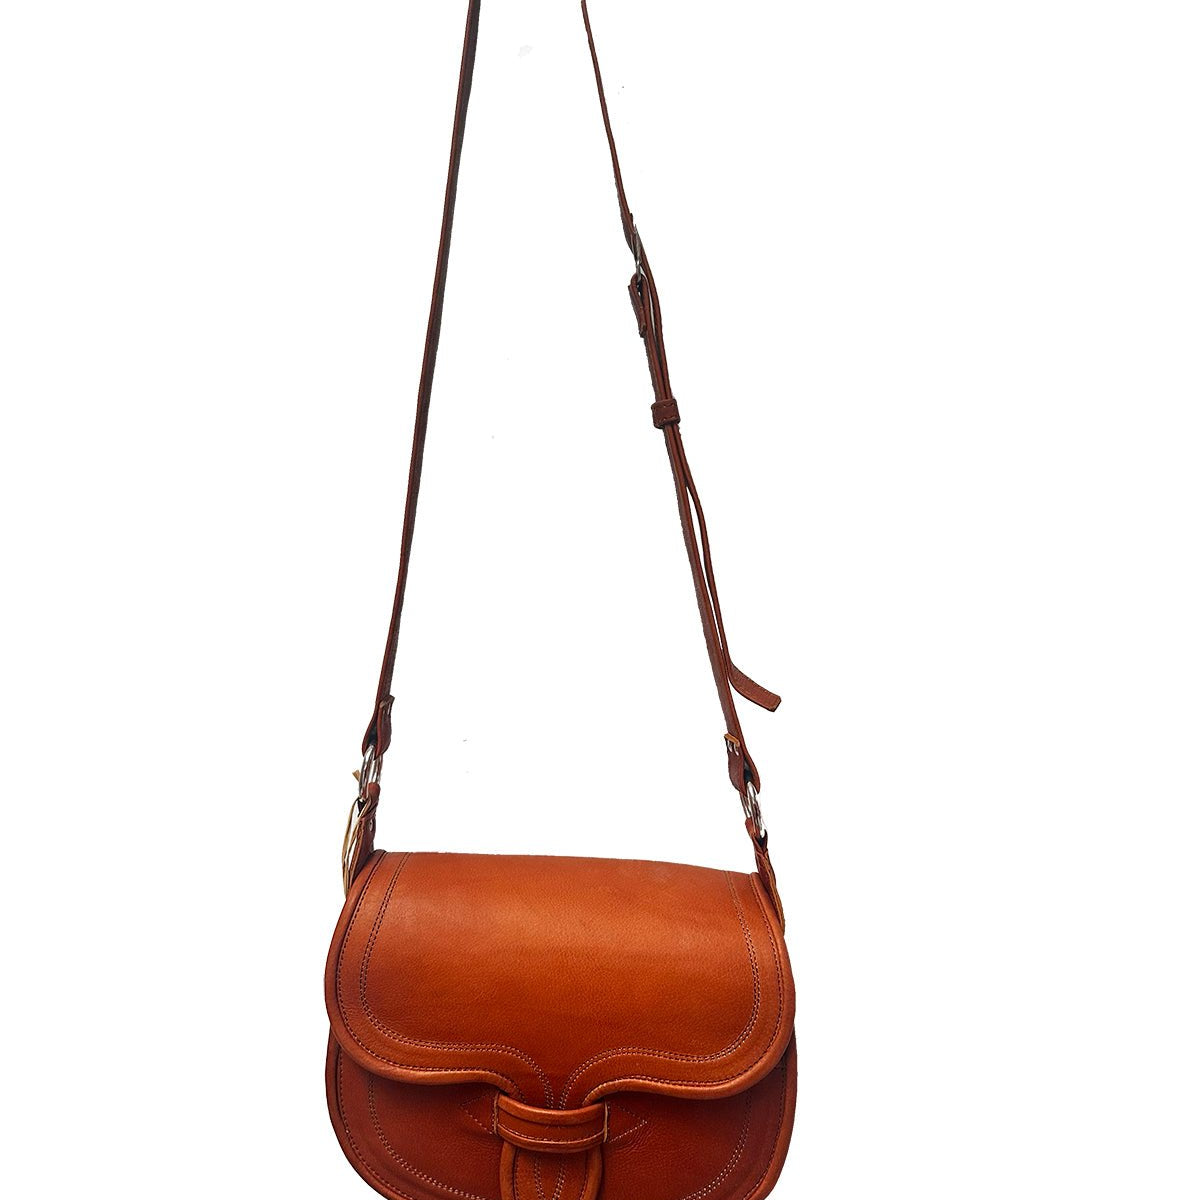 The Camel Oversized Crossbody Carriel Bag hanging from a hook. The bag has a flap closure with an adjustable strap.